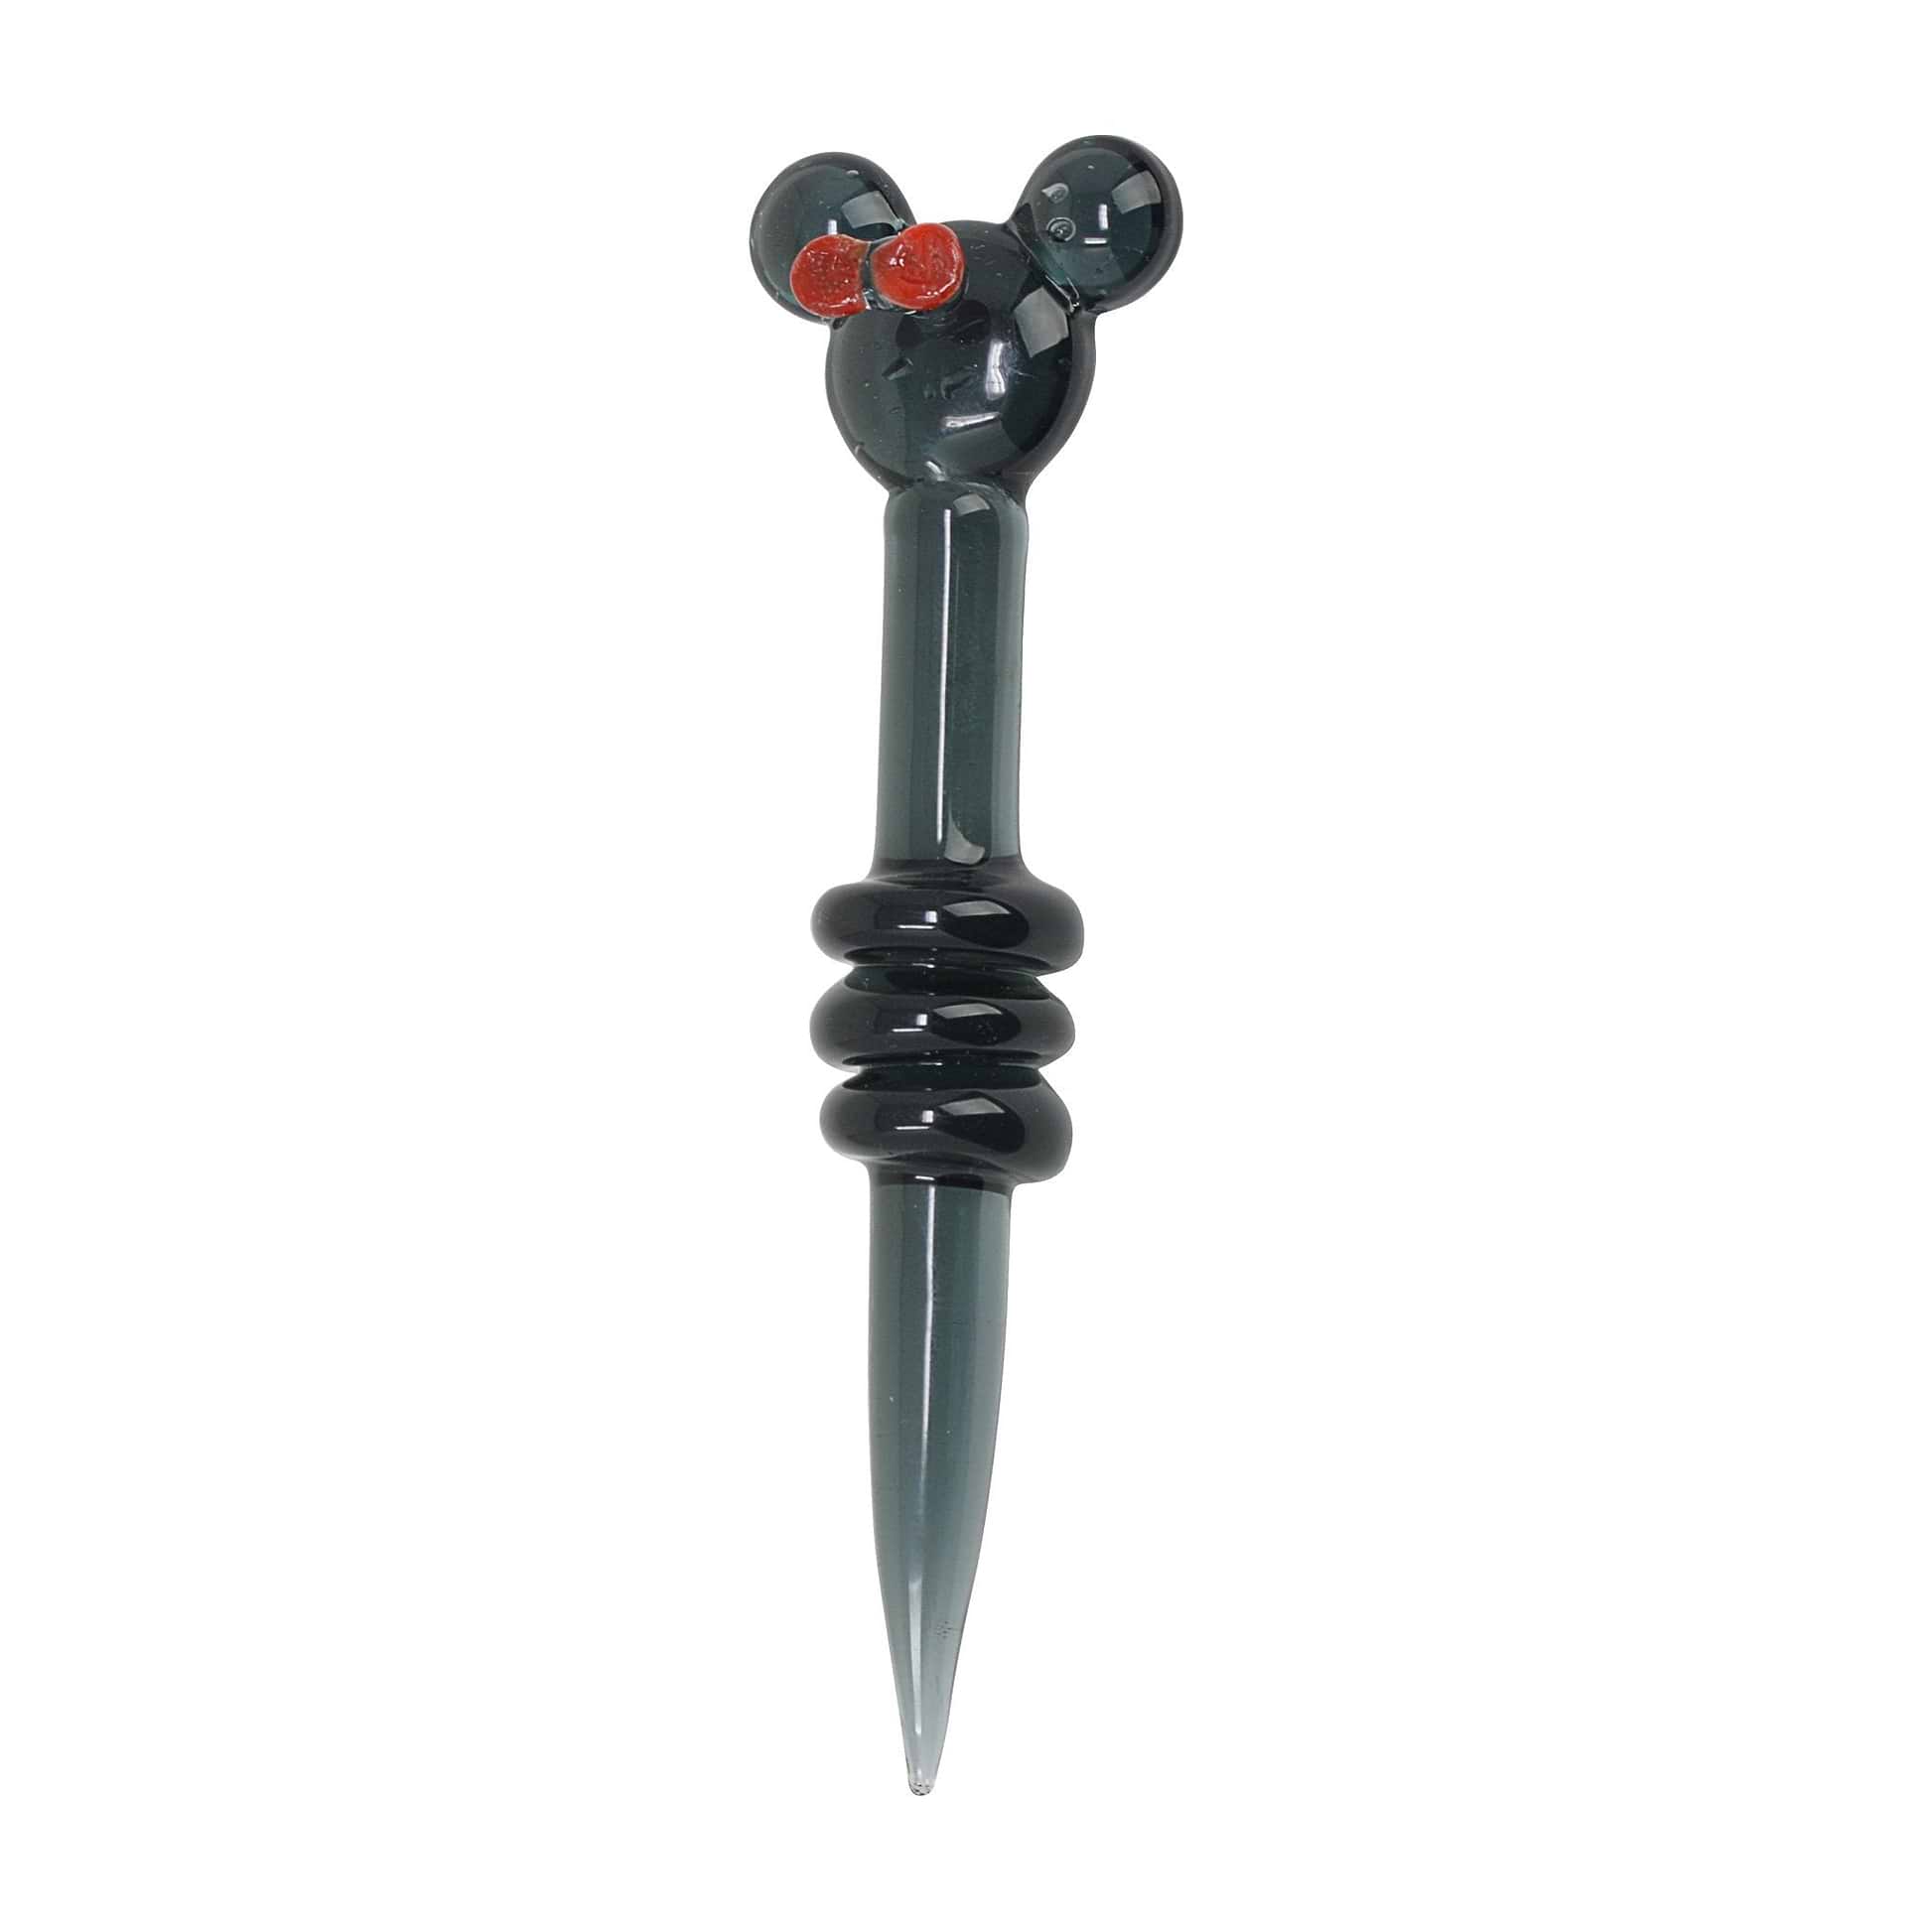 Heat-safe glass dab tool dabber smoking accessory in cute Disney classic Minnie Mouse ears design as handle and pointed end